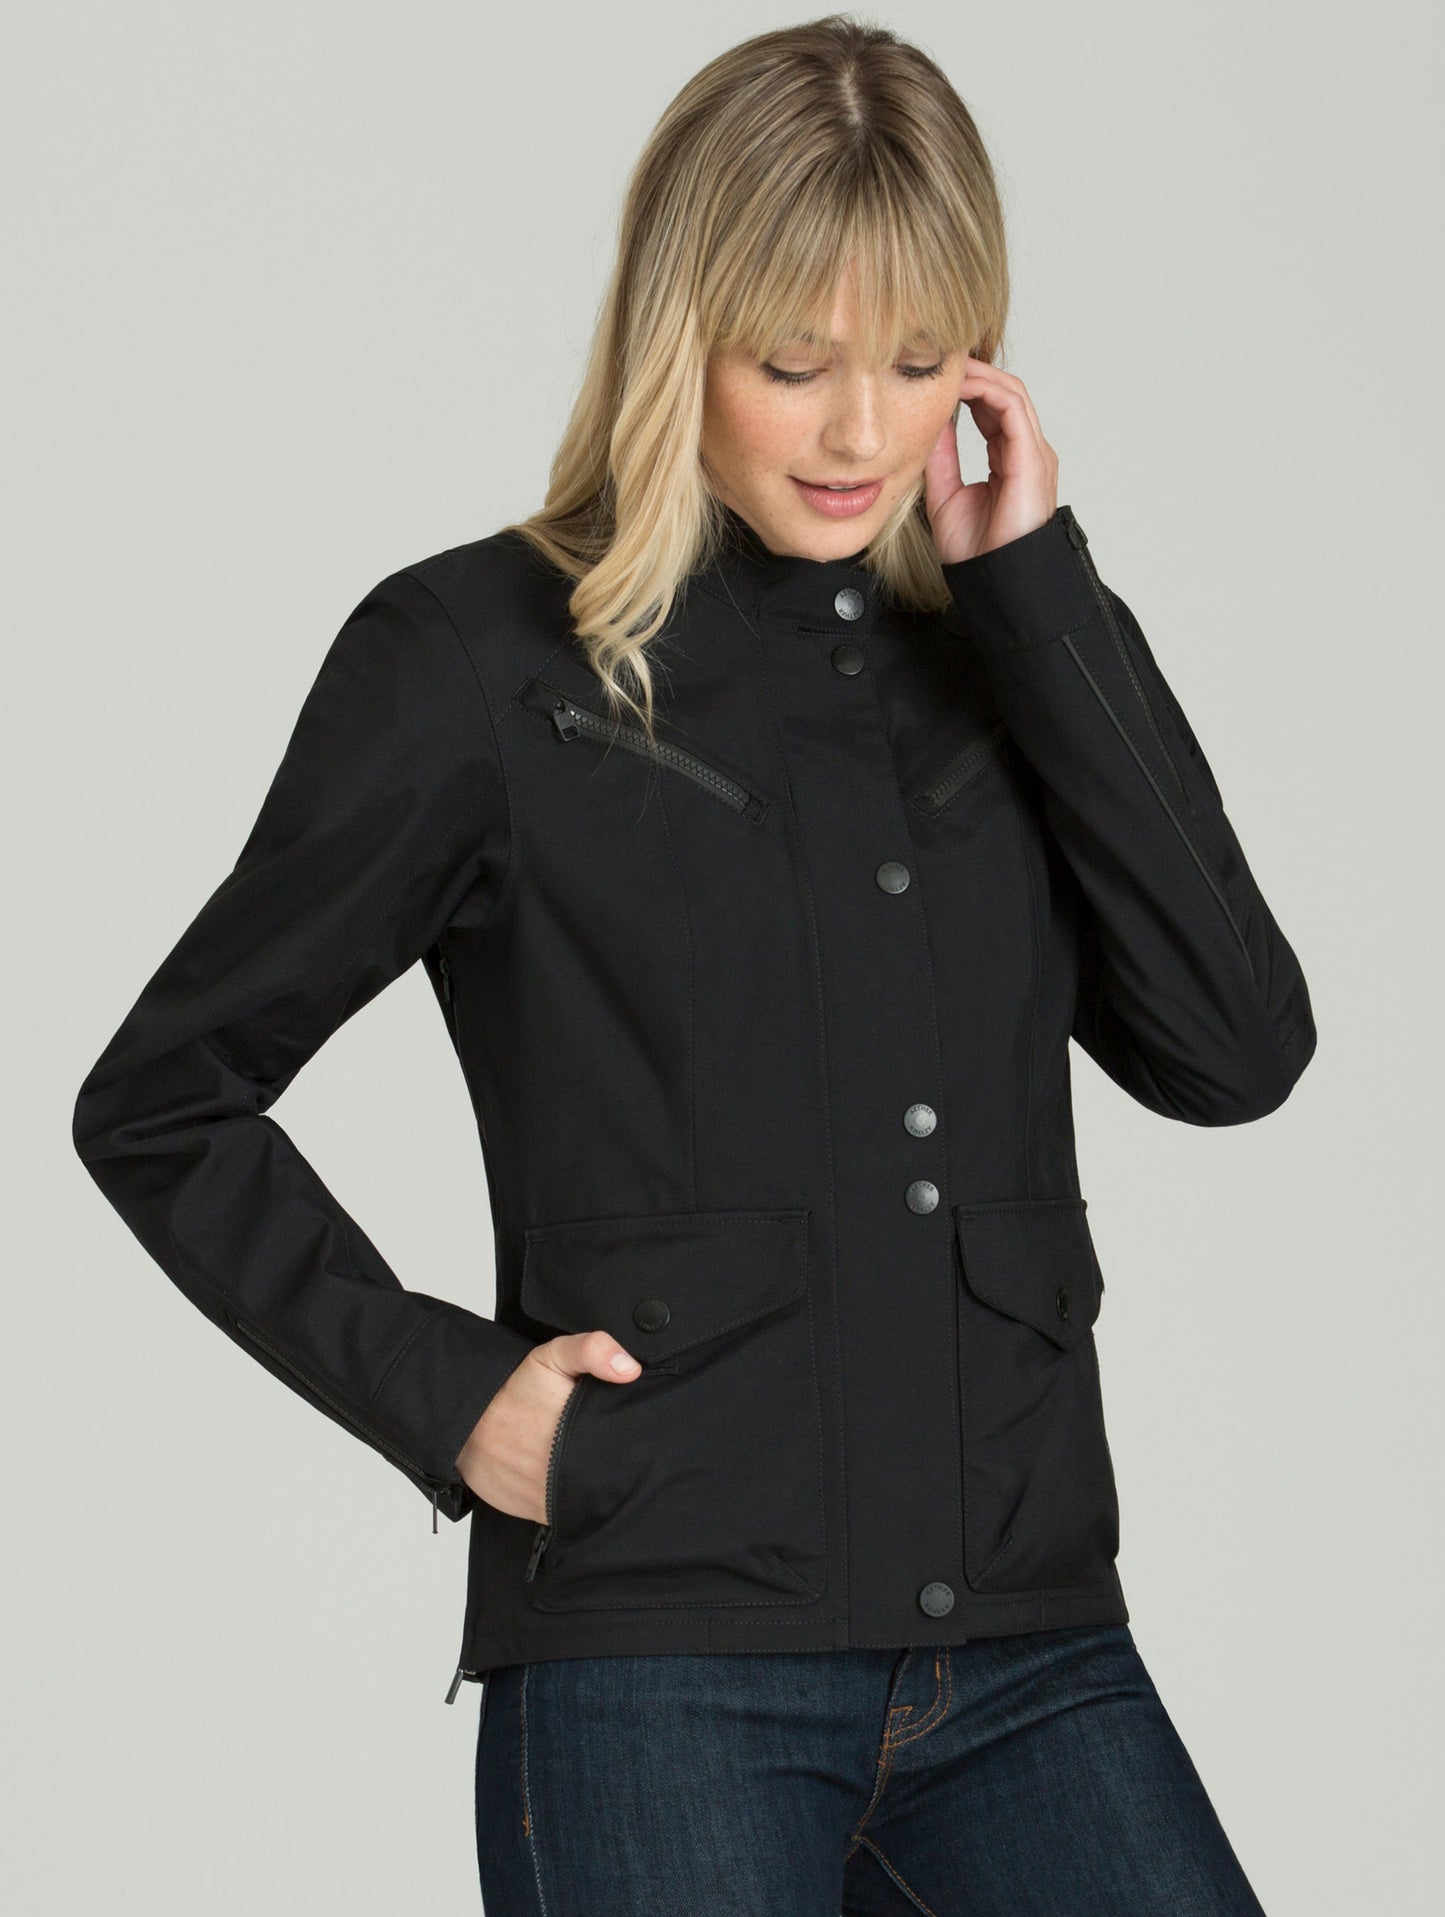 Woman wearing black Chase Motorcycle jacket from AETHER Apparel